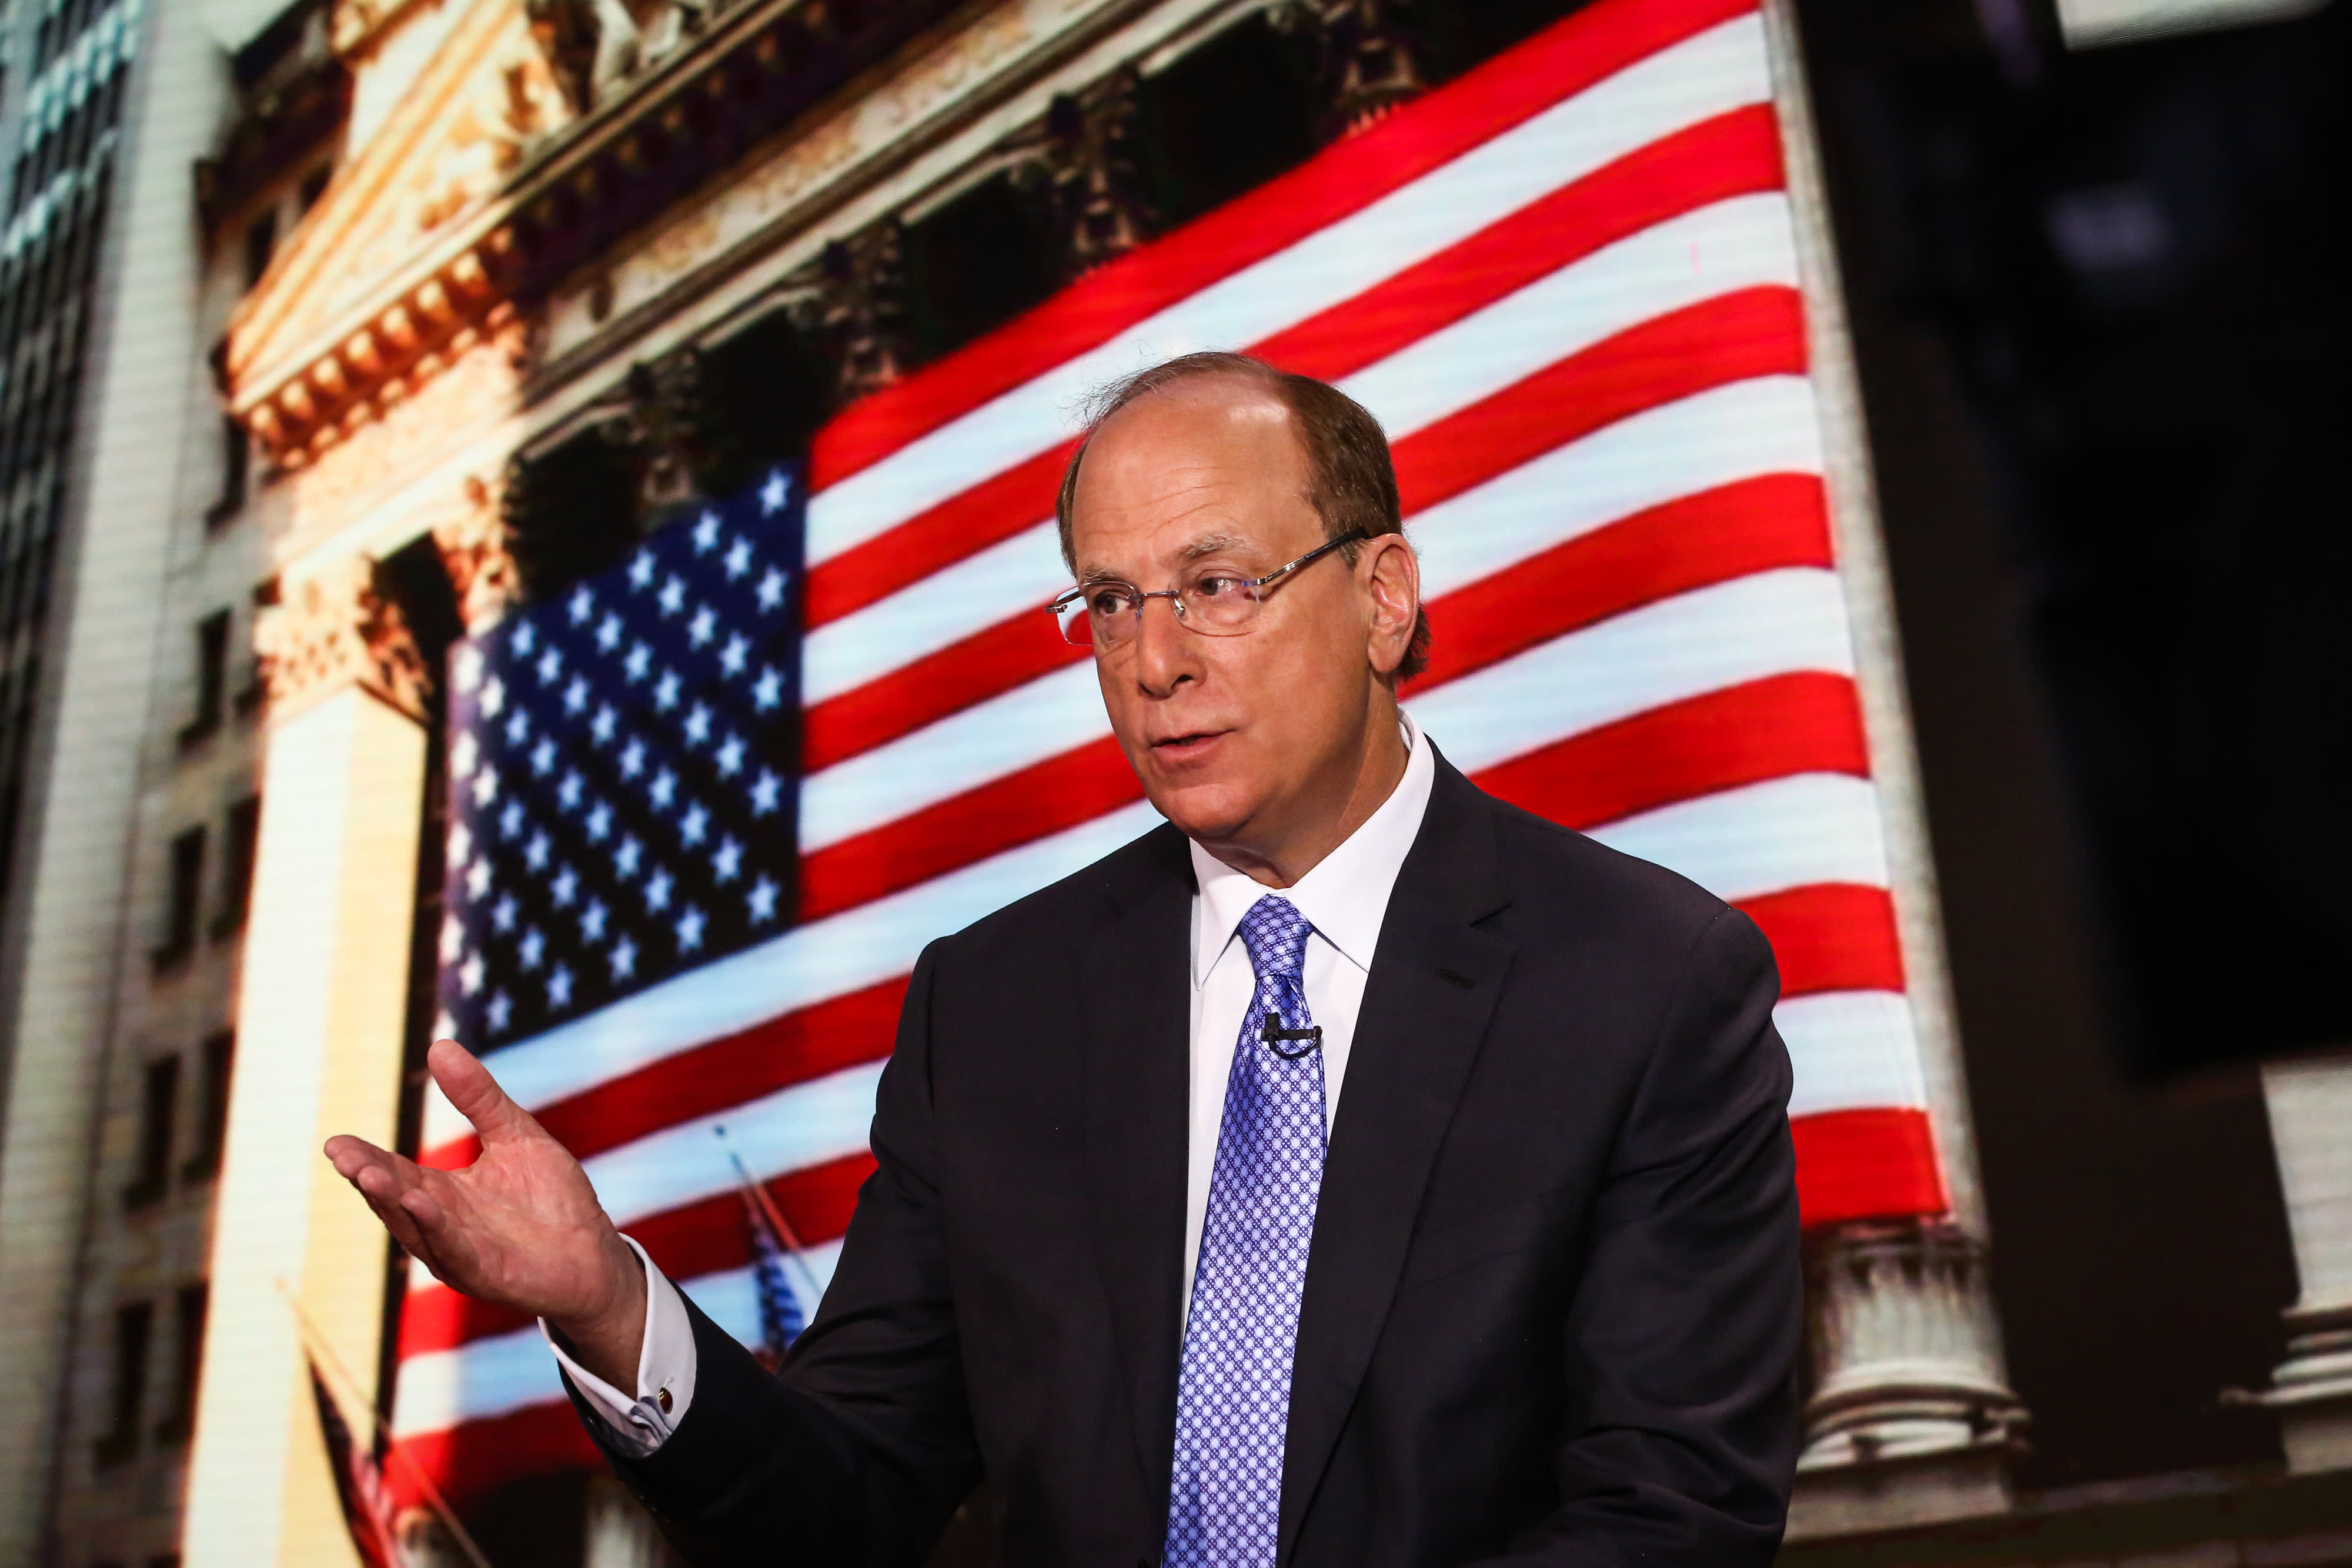 Blackrock CEO Larry Fink’s support for fossil fuels criticized